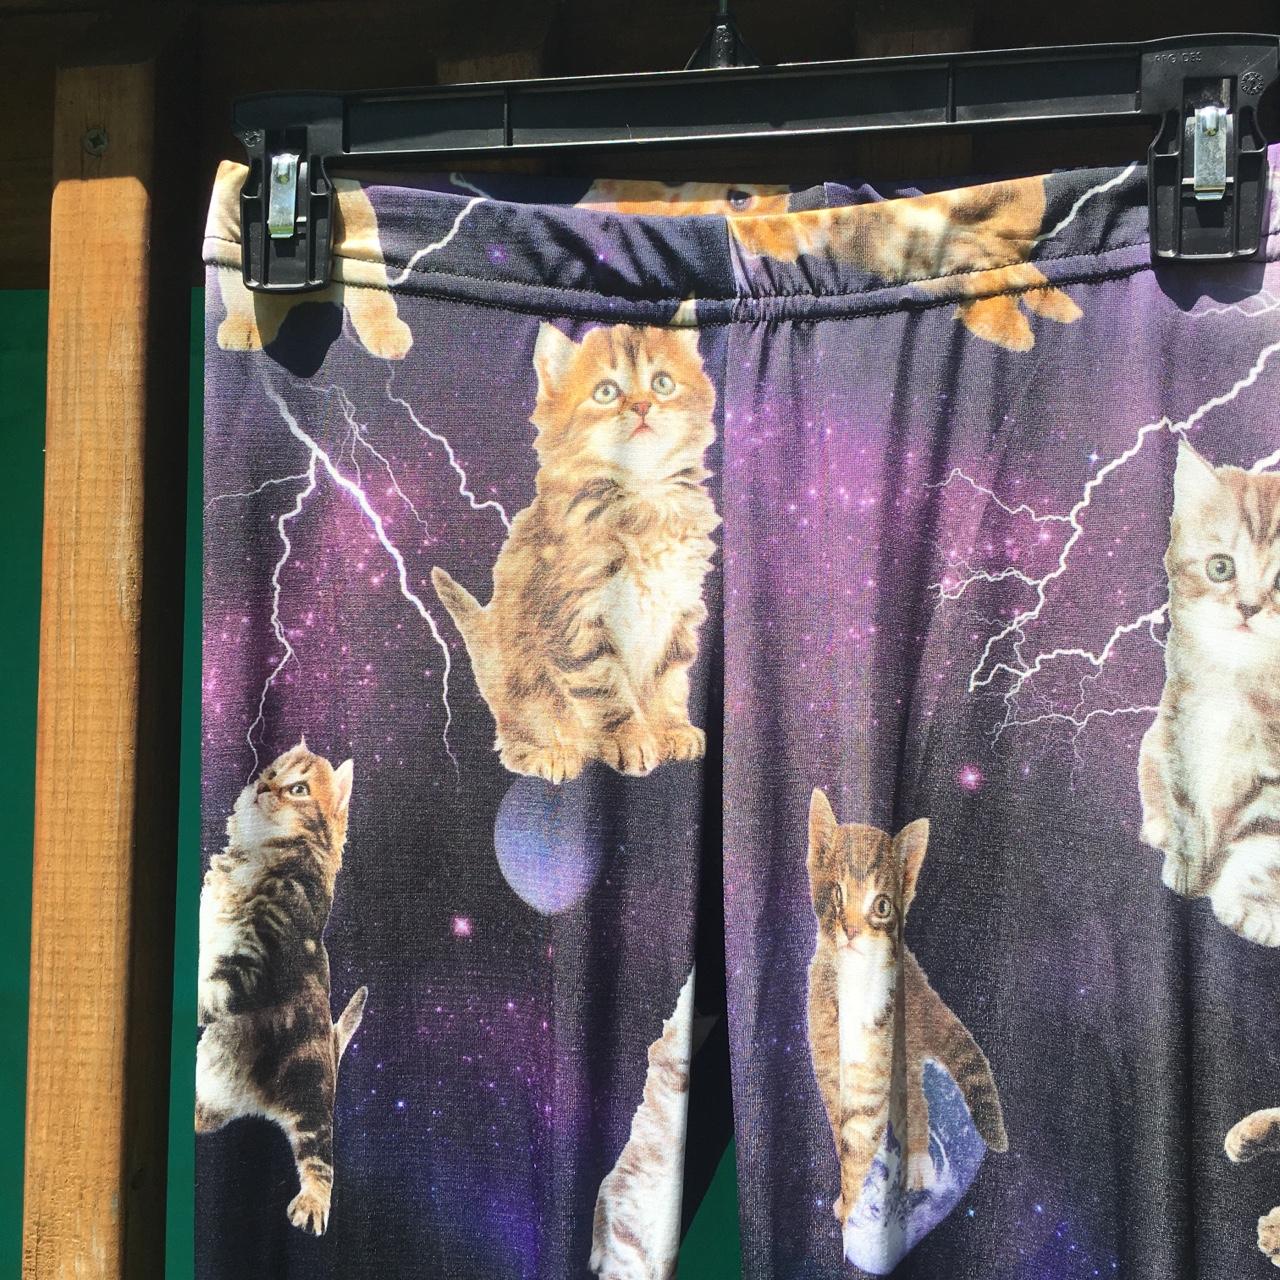 galaxy cat leggings. not sure of where i bought them - Depop